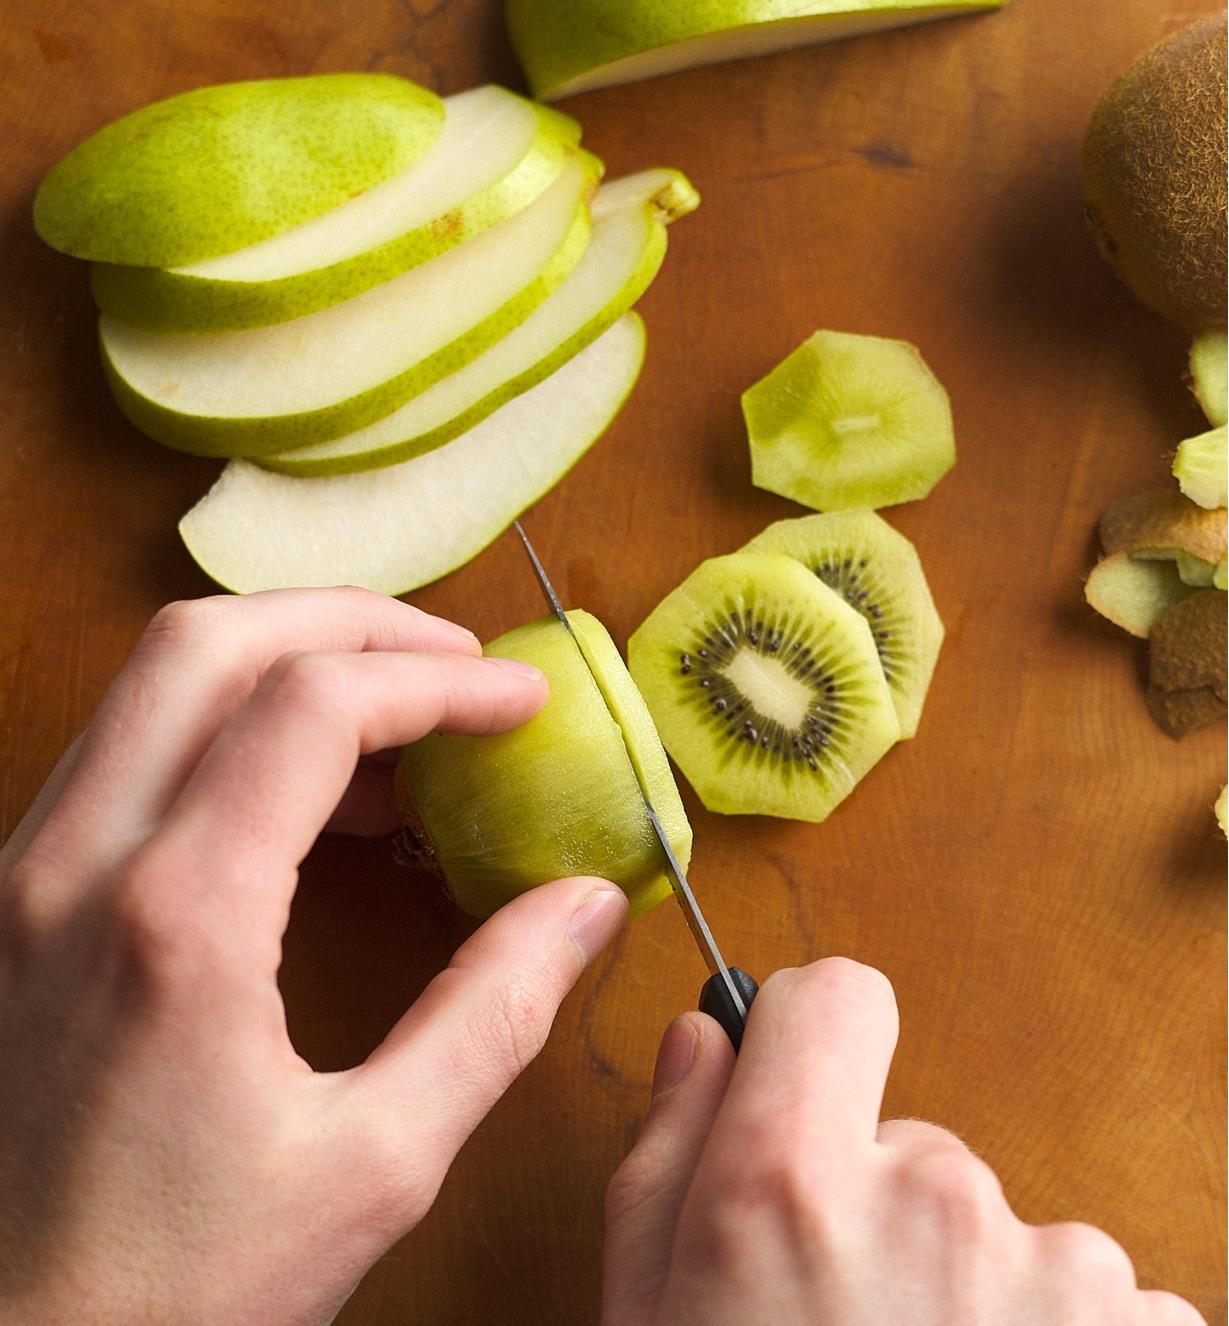 Slicing a kiwi fruit with the serrated paring knife